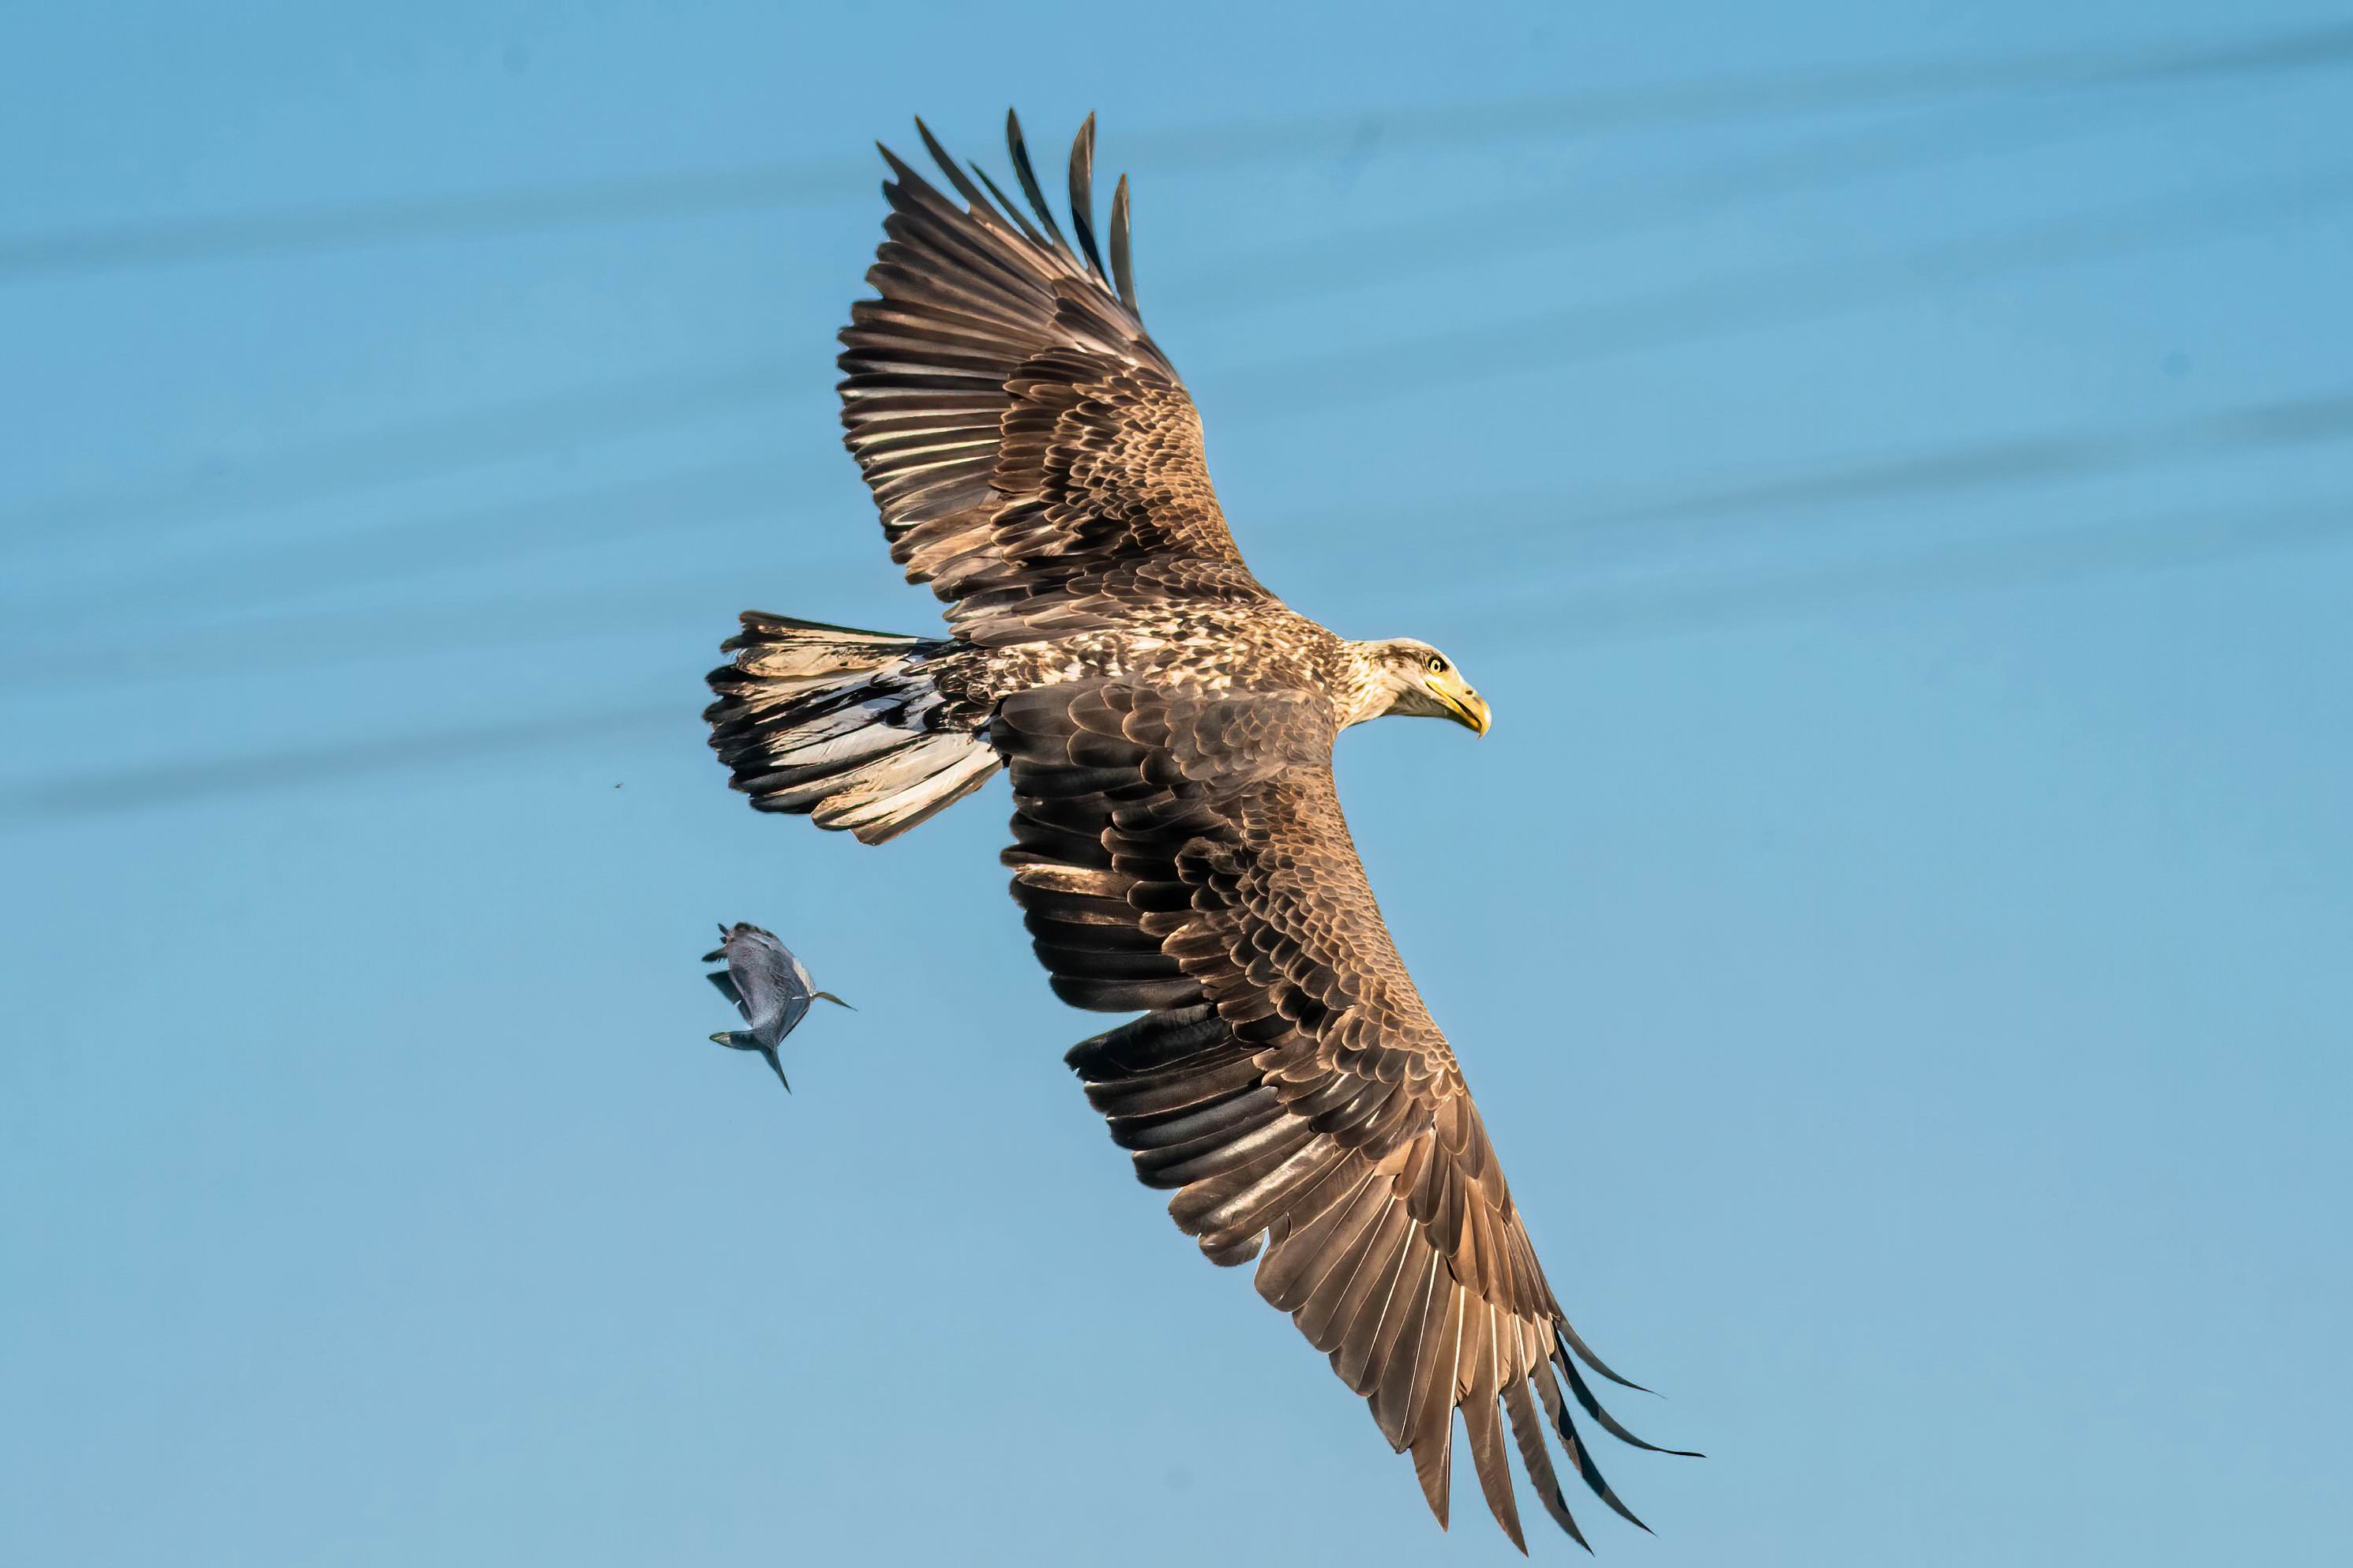 0049_Oppos Moment of a Juvenile Eagle -001.jpg